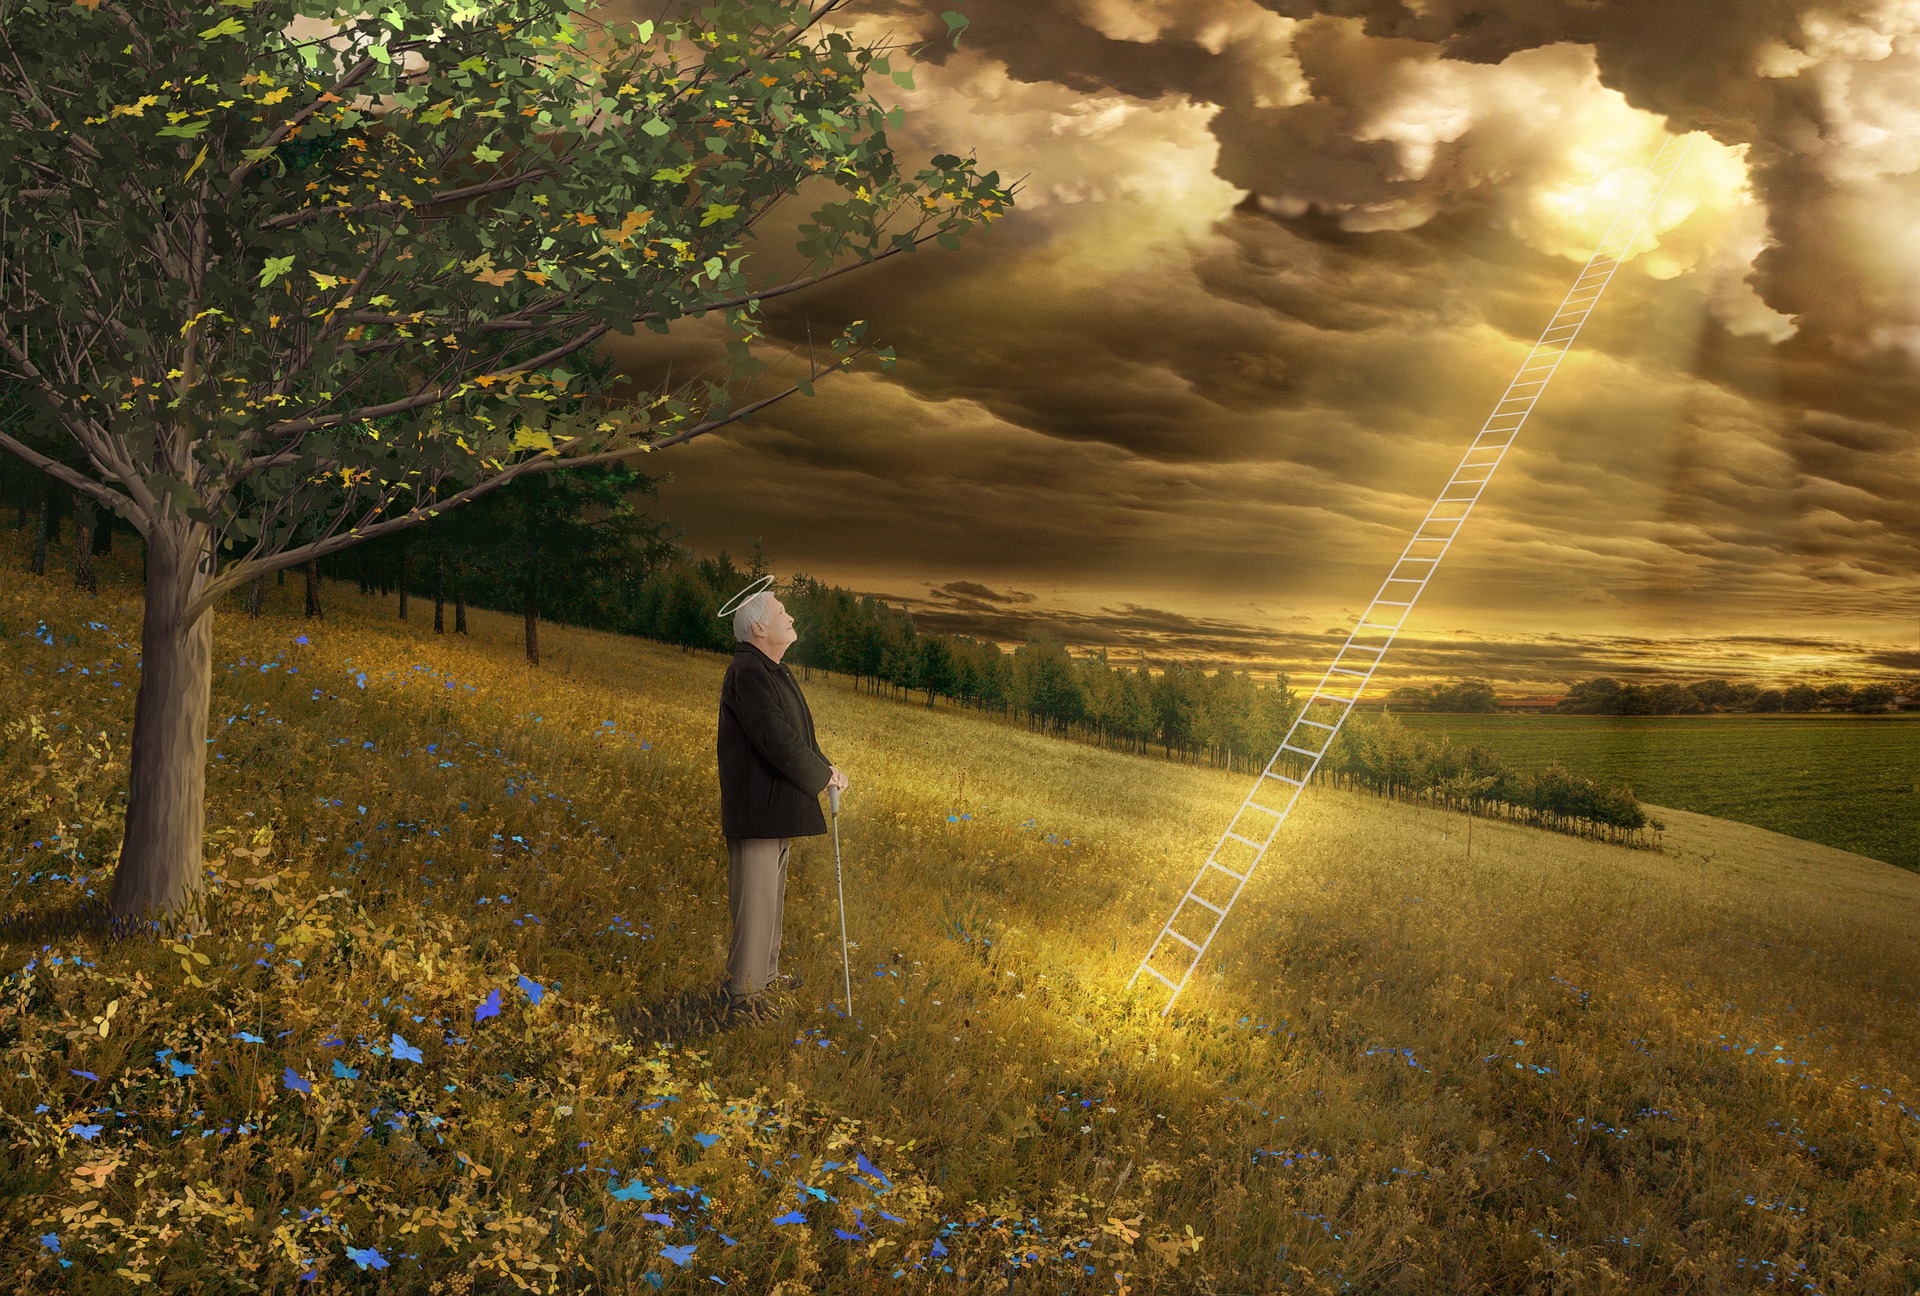 An old man with a halo (or is it an angel?) stands with a walking stick in a field of flowers and next to an orchard. A long ladder reaches up from the field into the clouds and into heavenly light. The man stands gazing at the light.